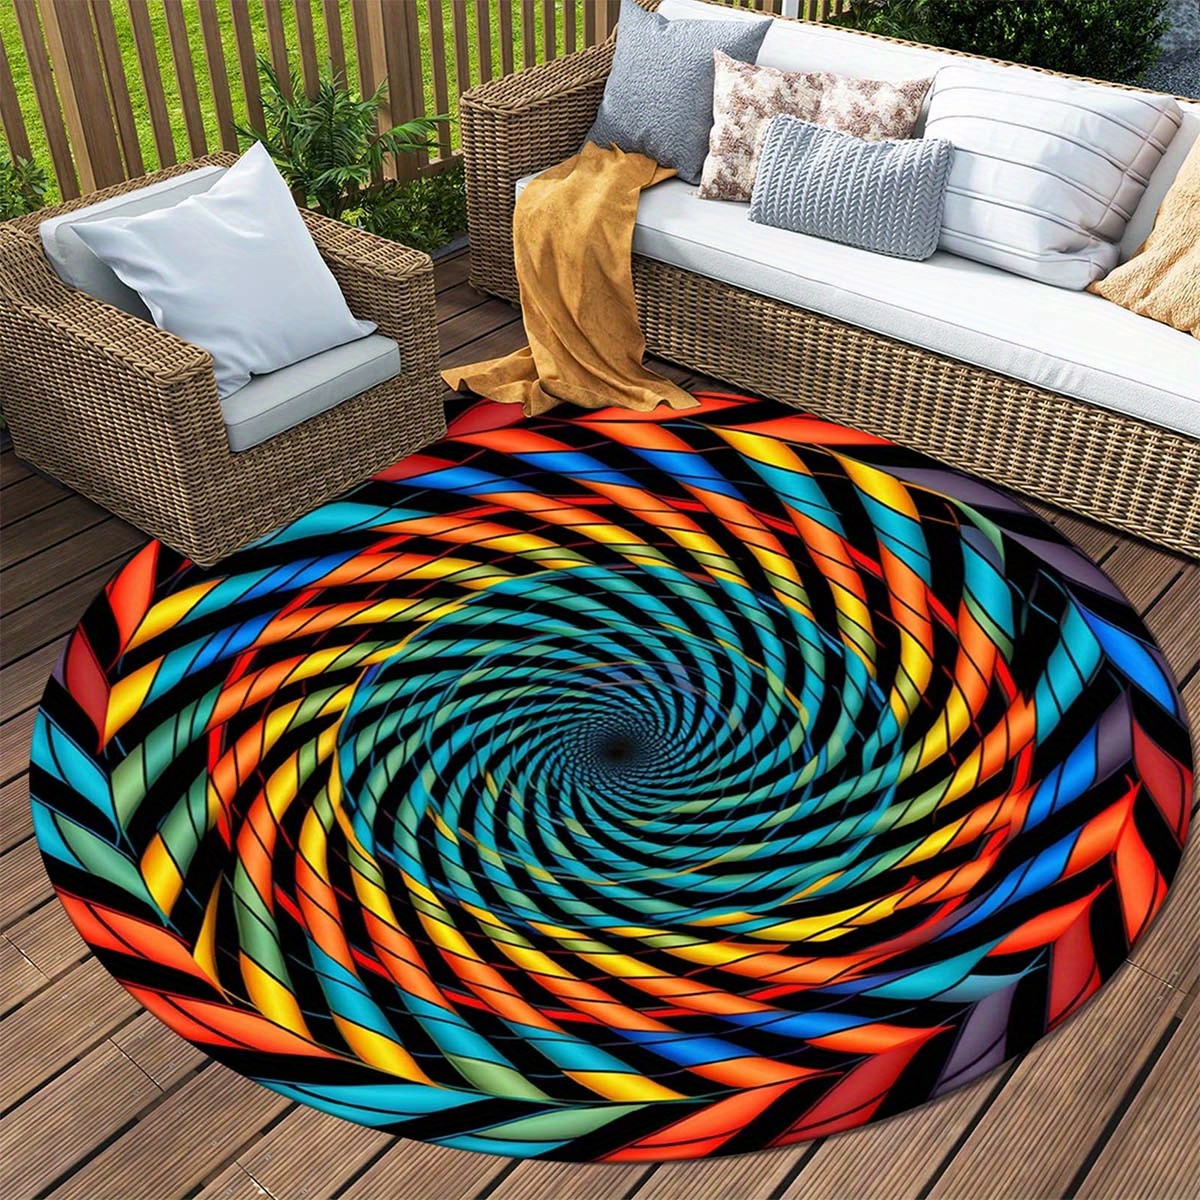 

1pc Polyester Round Area Rug With Illusion Vortex Pattern, Non-slip Washable Indoor Carpet Mat For Bedroom, Living Room, Office, Nursery - Durable, Non-shedding Home And Outdoor Décor